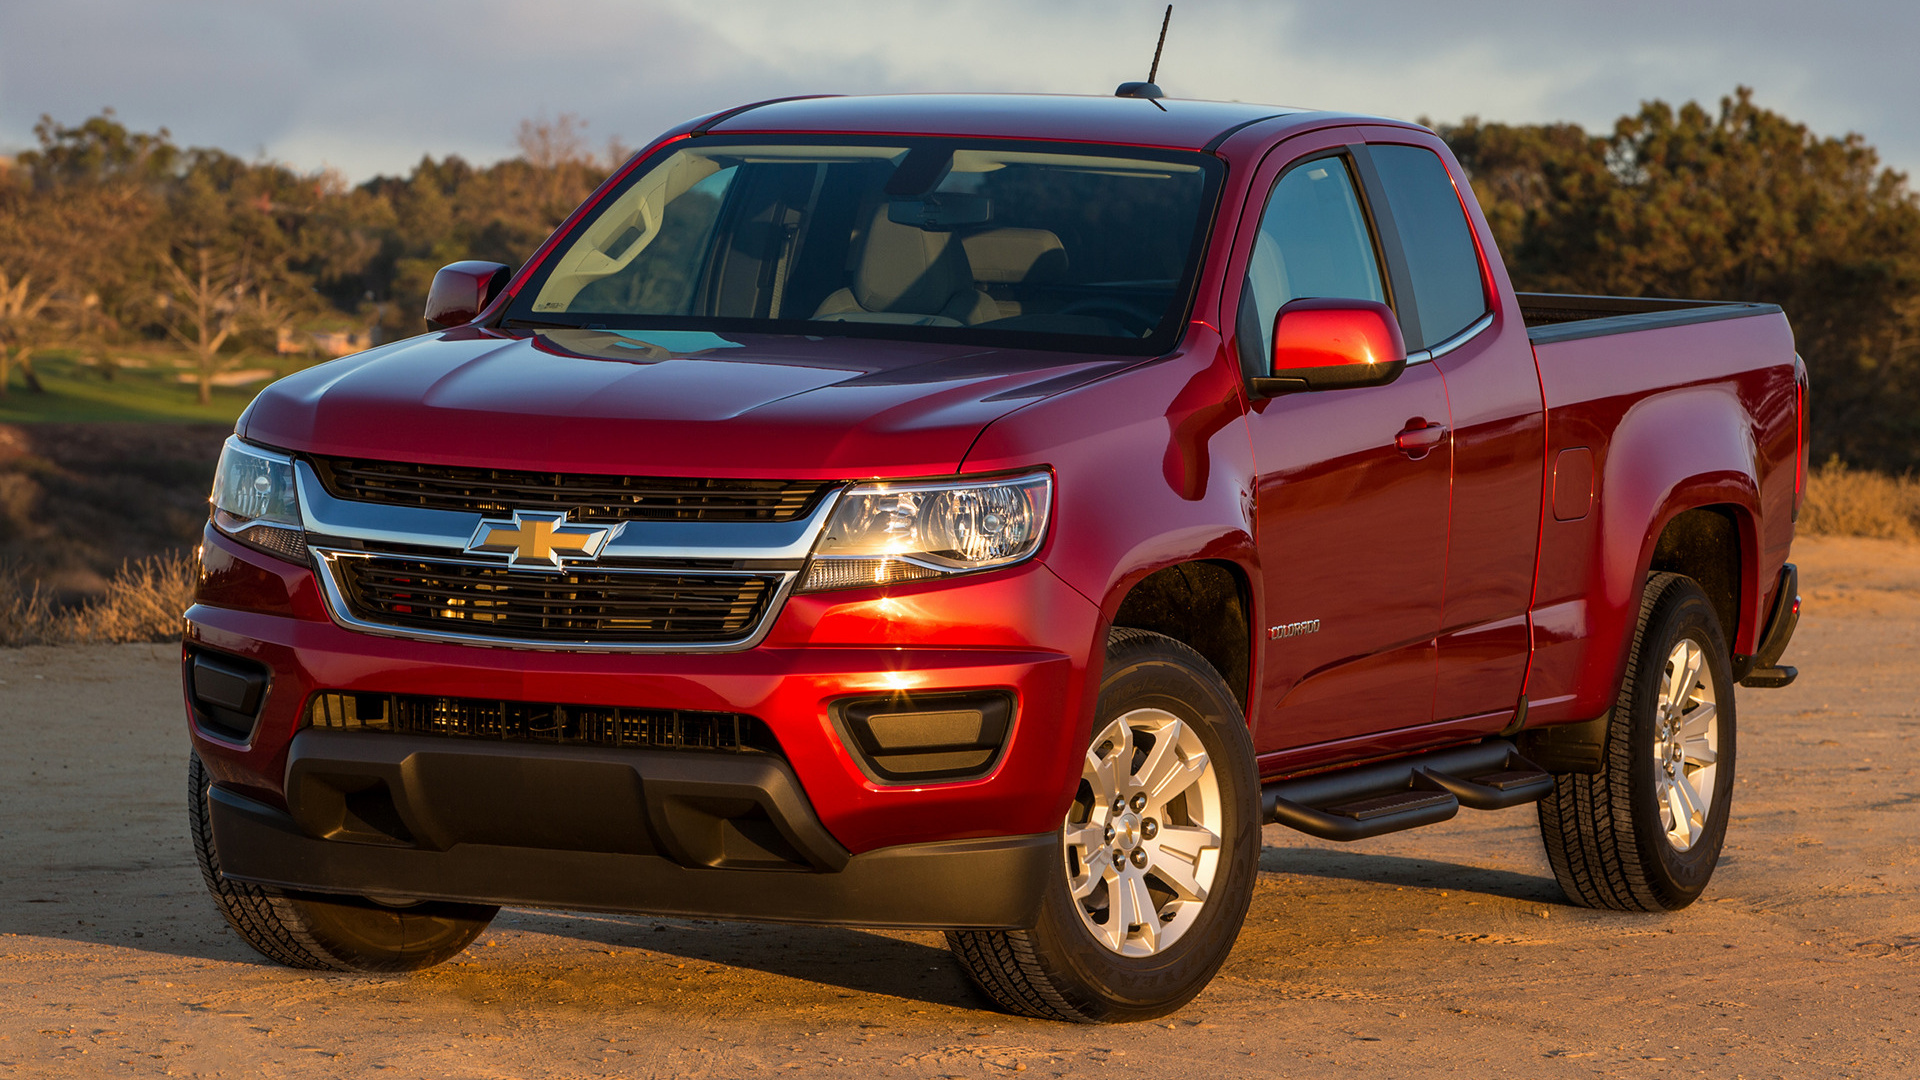 Chevrolet Colorado Lt Extended Cab Wallpaper And HD Image